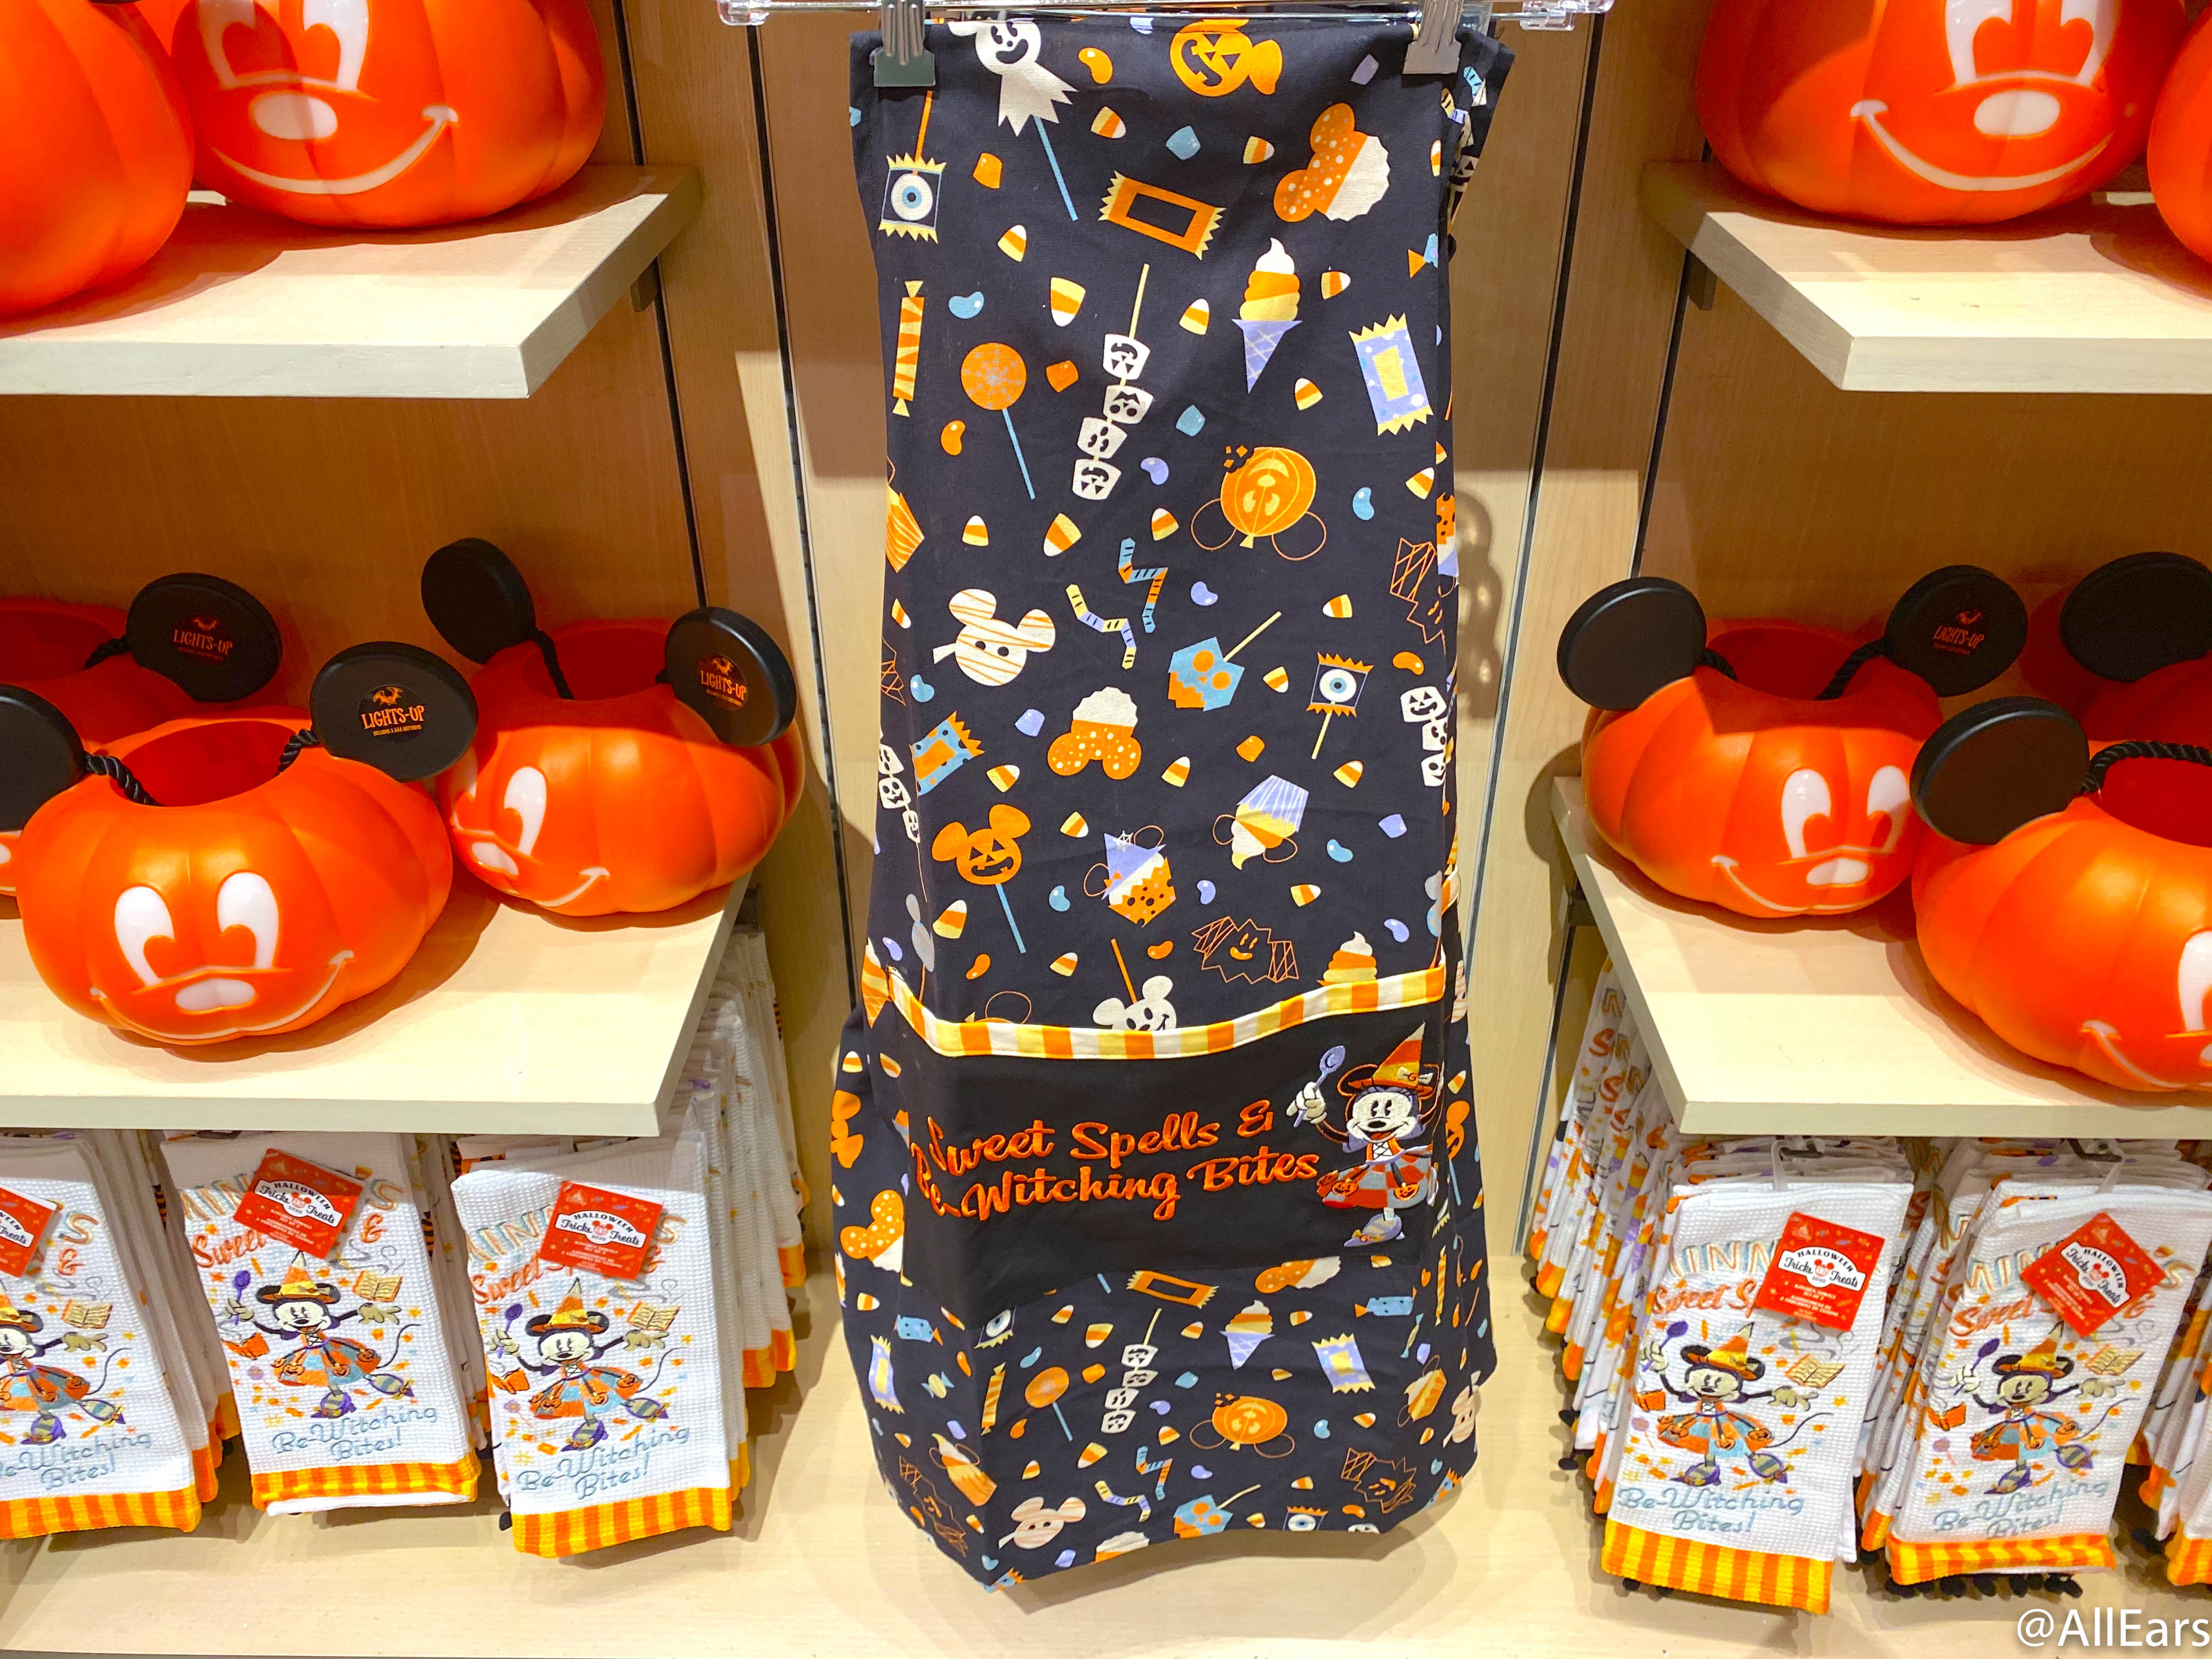 FIRST LOOK! Halloween Merchandise Has Officially Made Its Way into